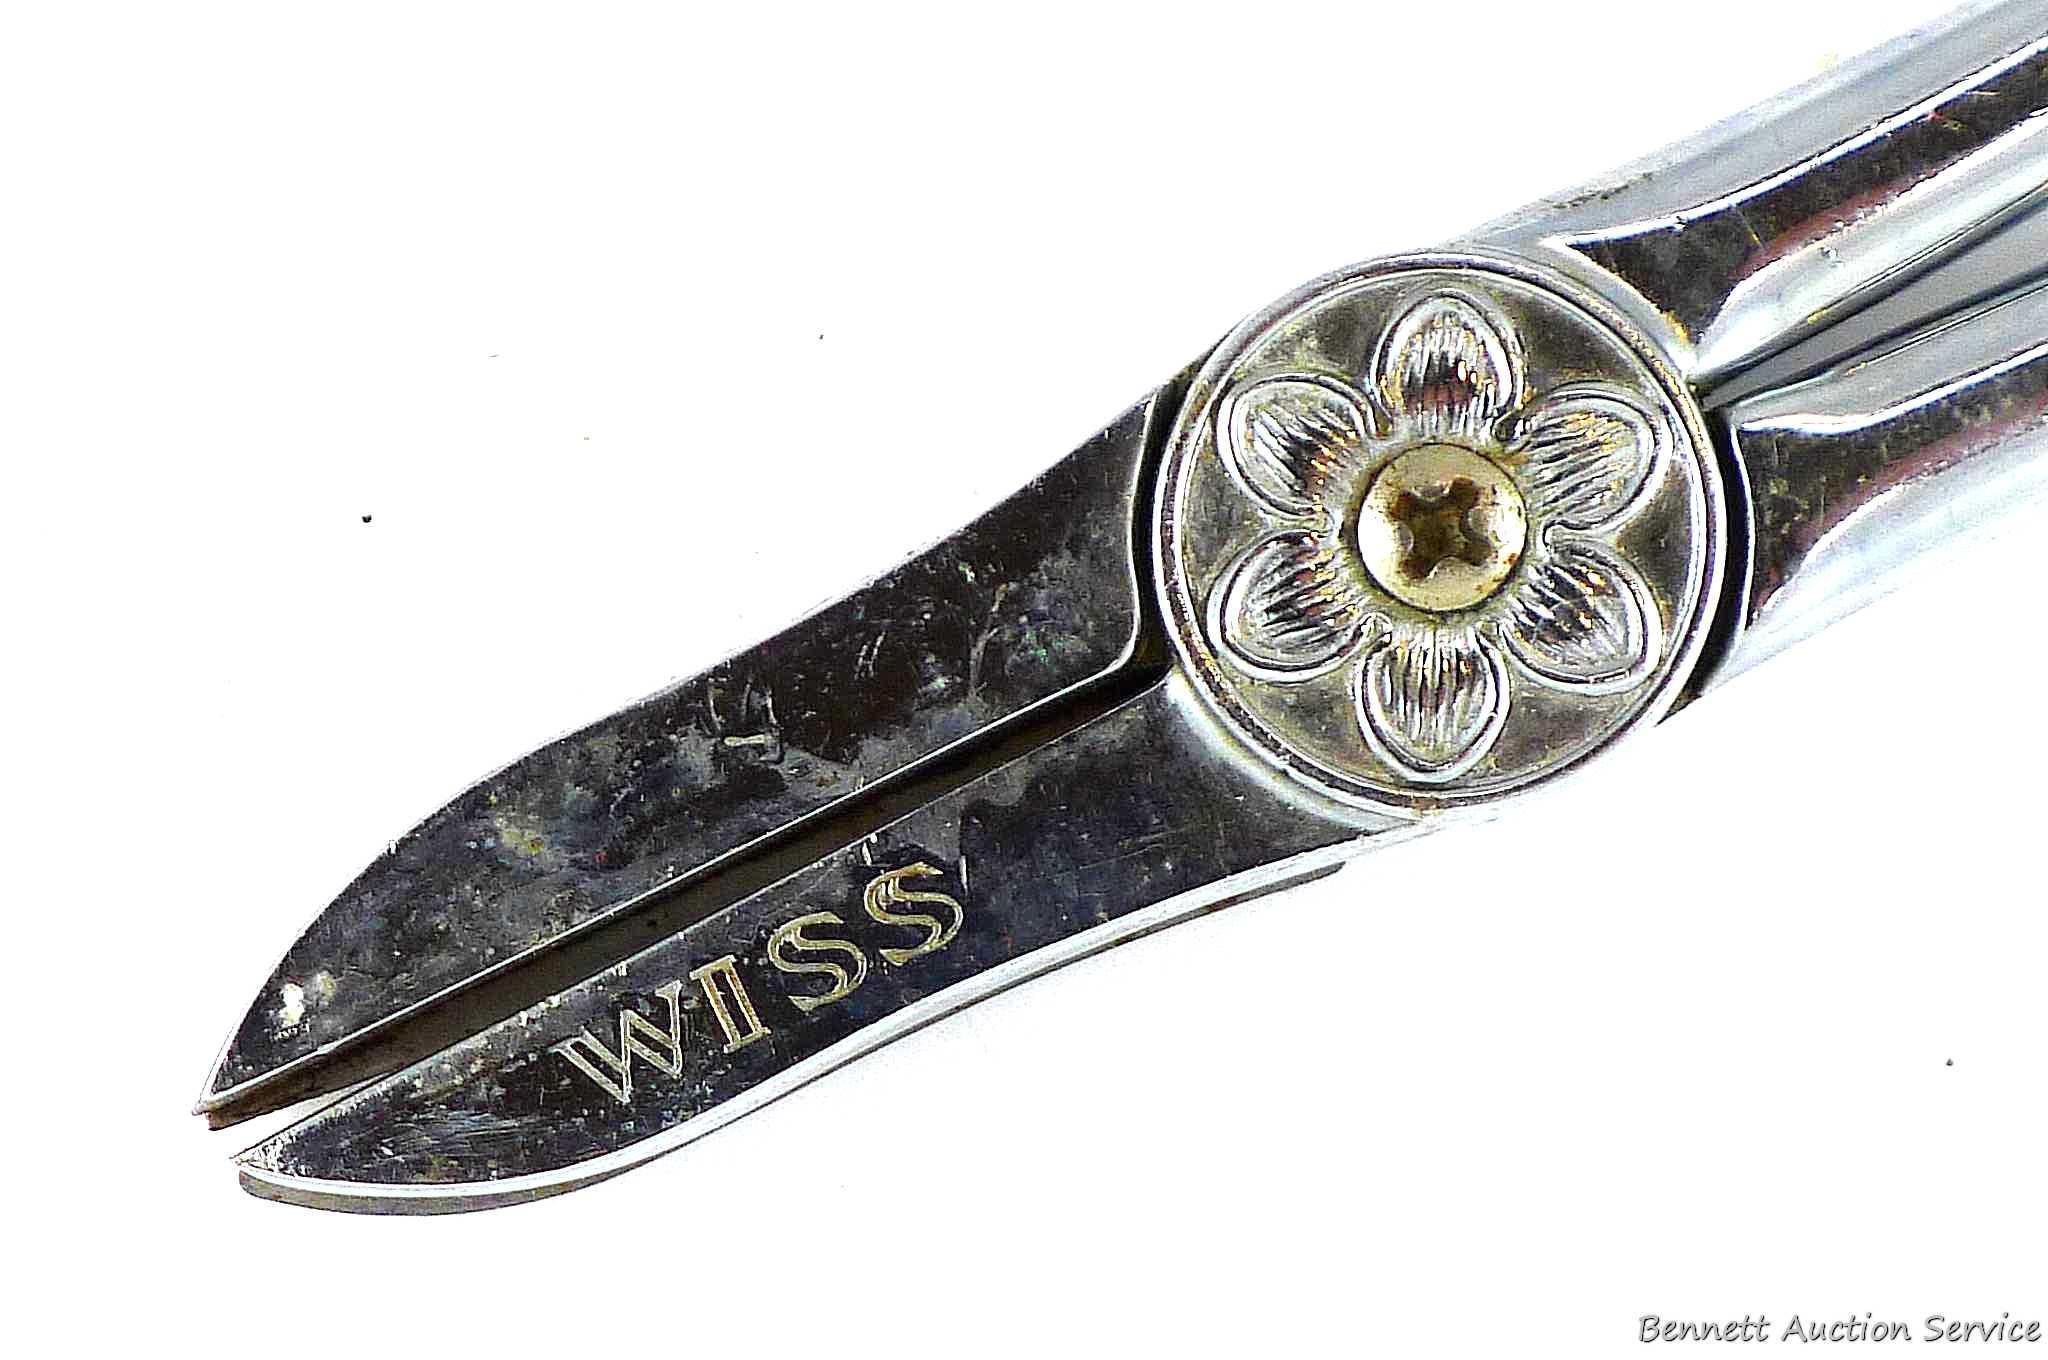 Antique Wiss flower shears measure 6-1/2" overall. Neat piece.